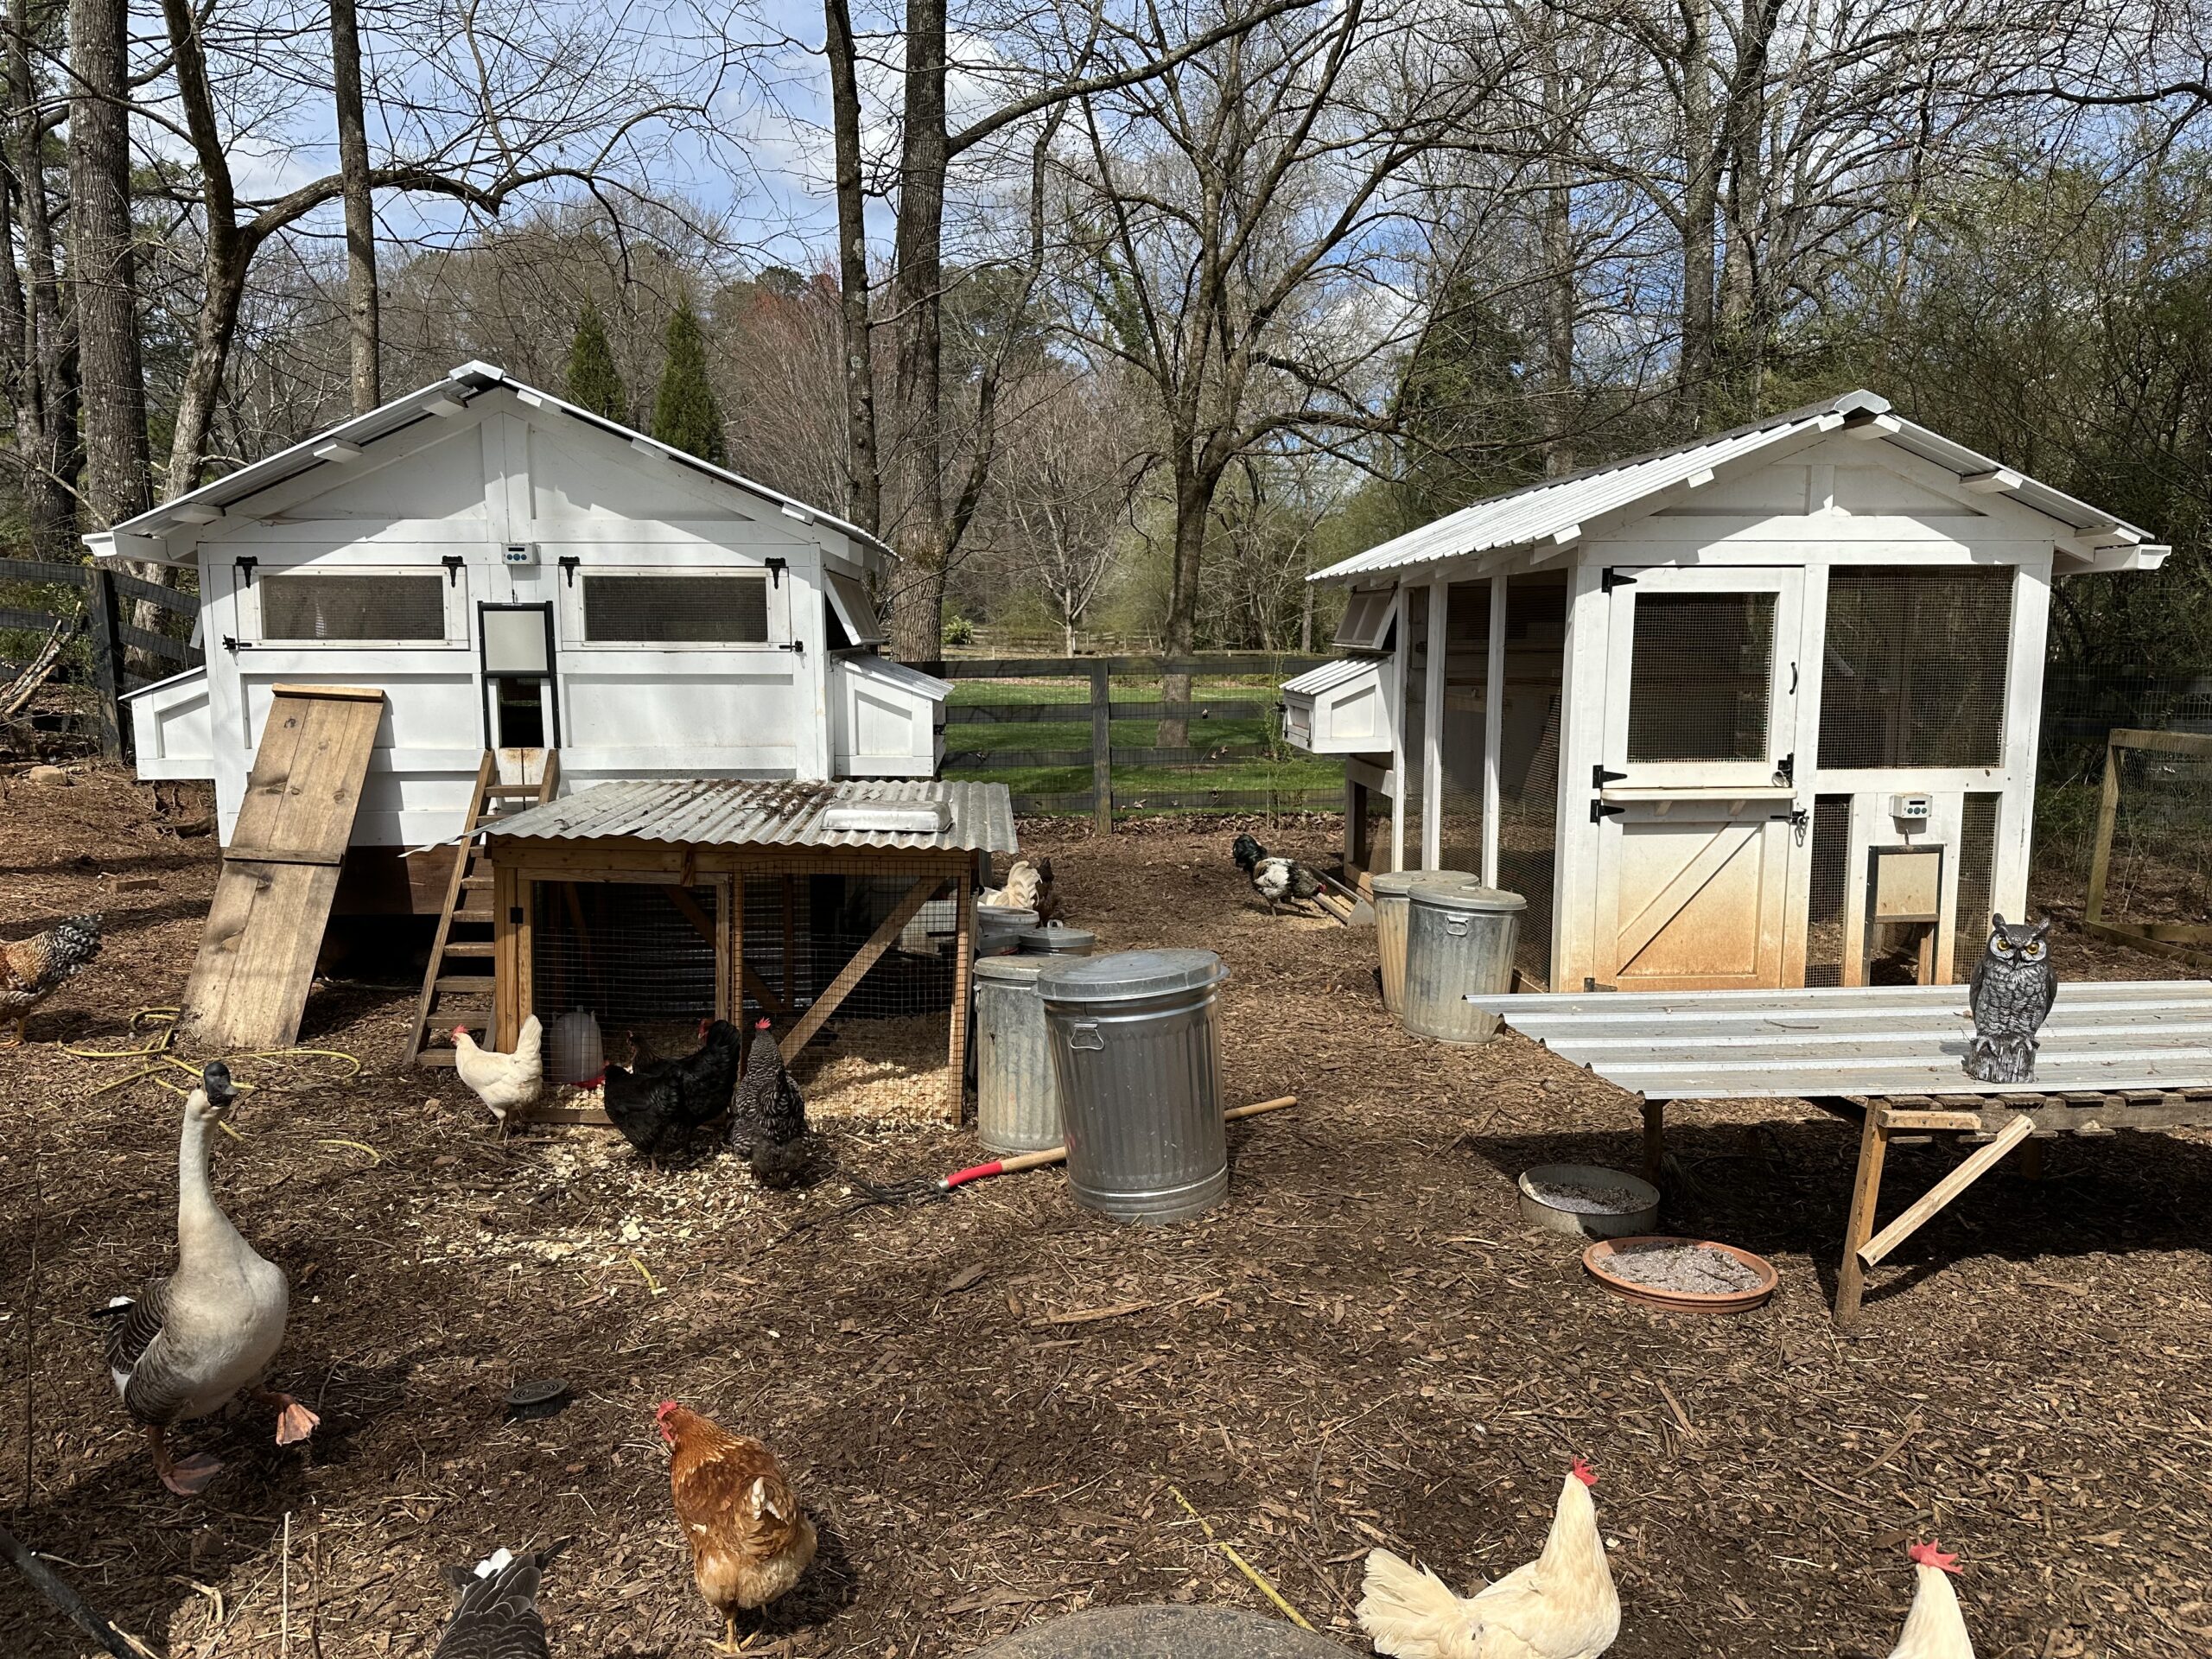 Factors to consider when buying or building a chicken coop